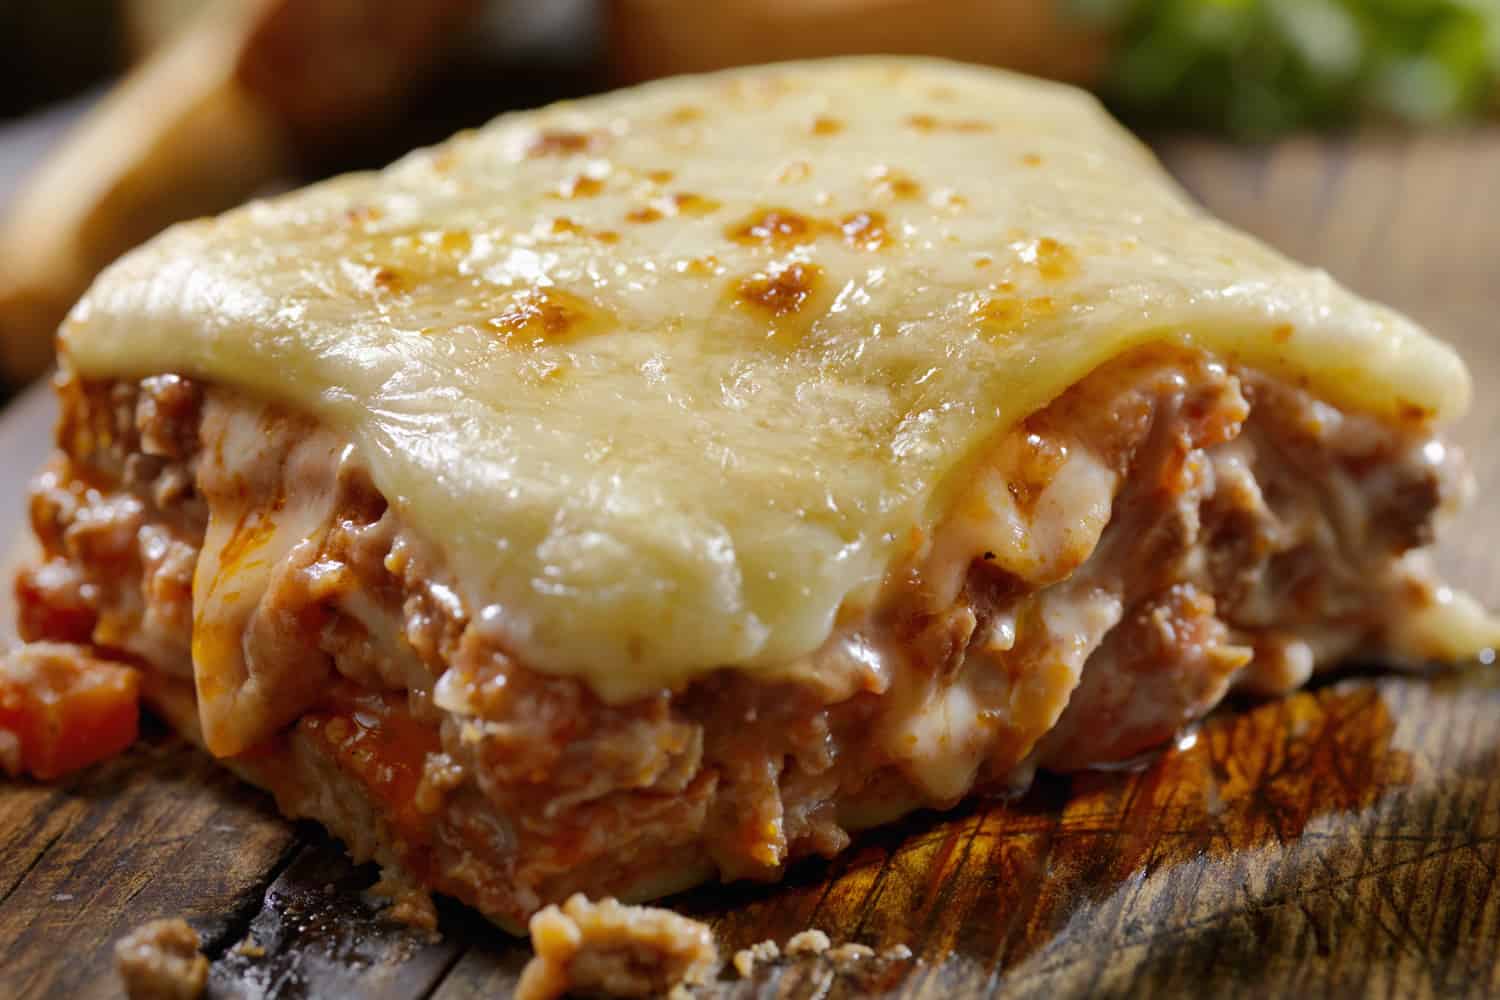 Cheesy, Beef and Veal Lasagna with a bechamel sauce and ricotta cheese